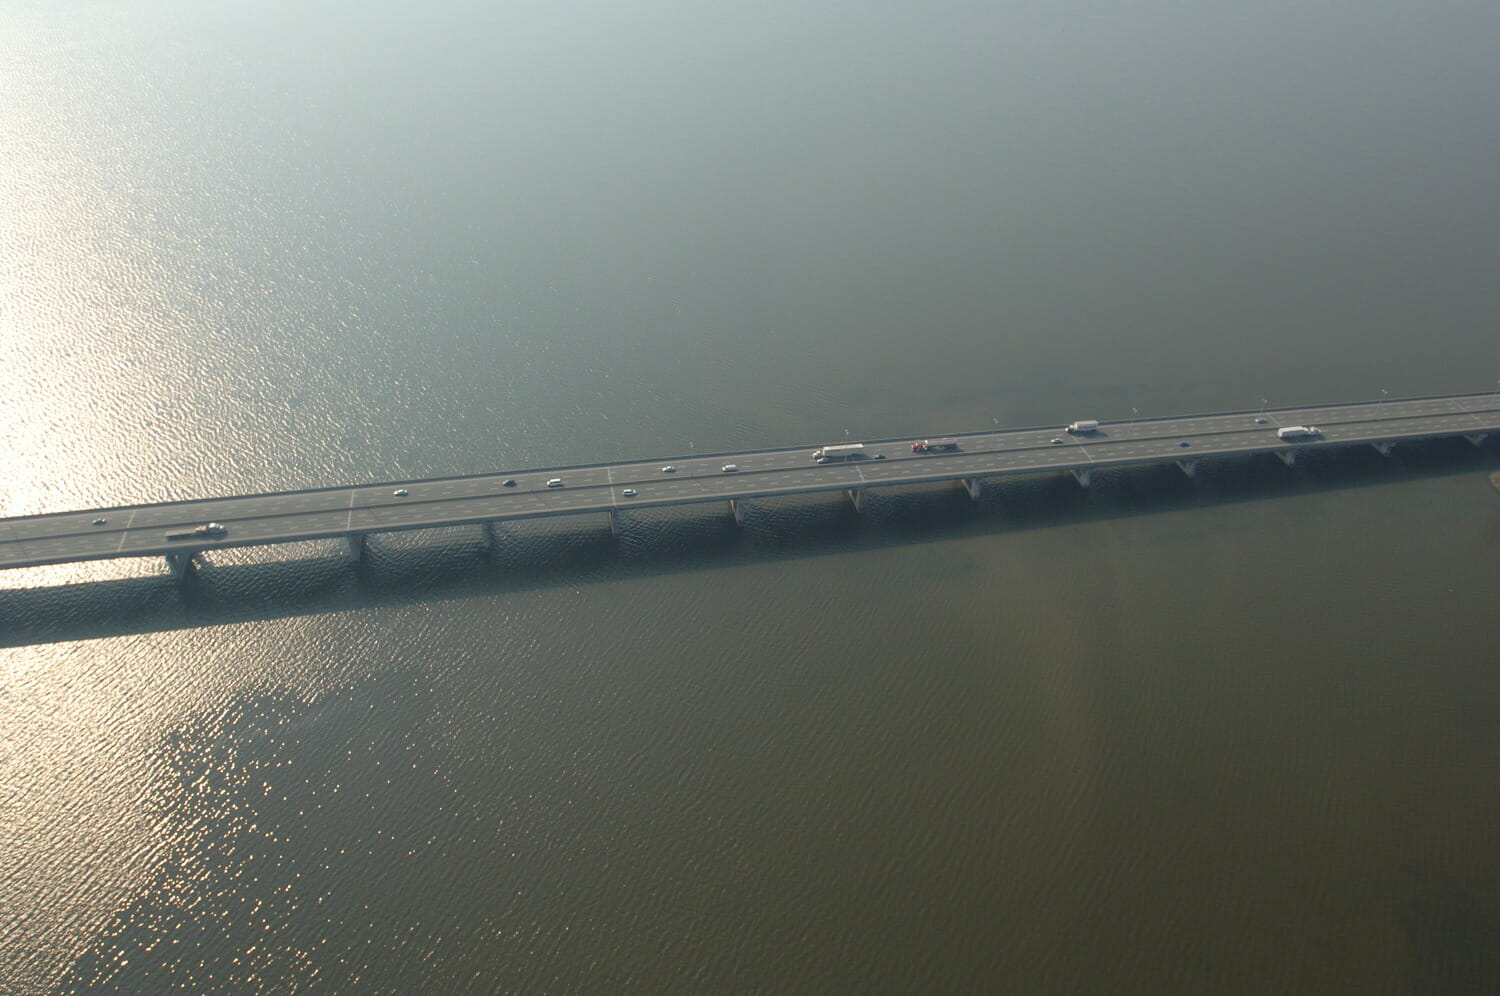 A bridge over a body of water.